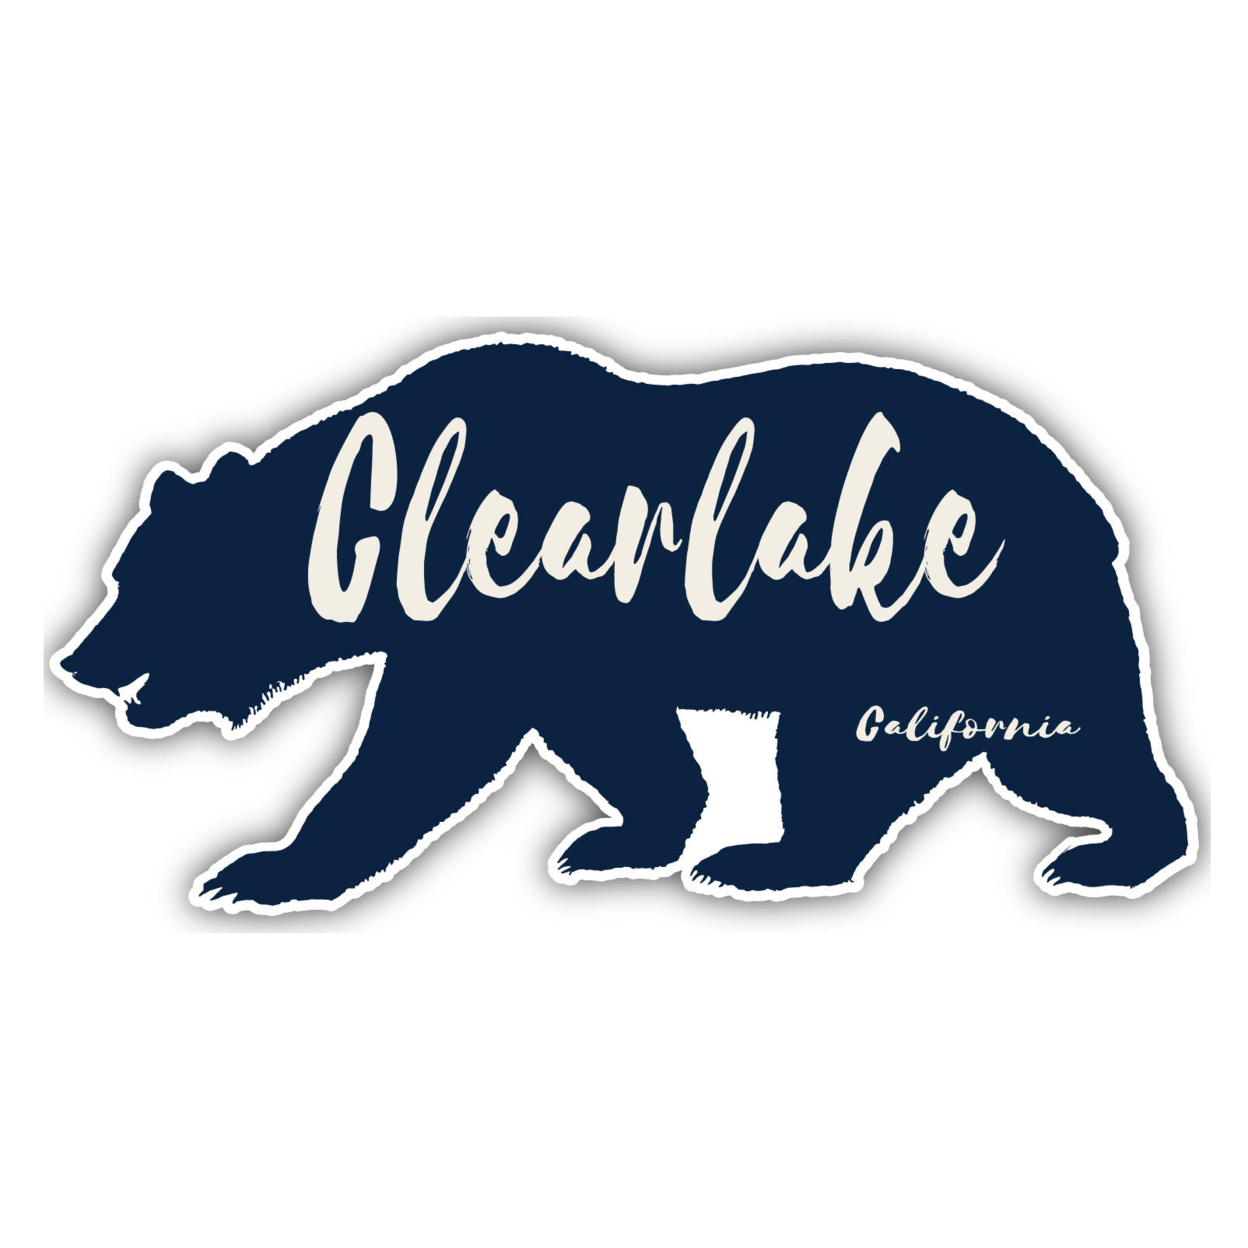 Clearlake California Souvenir Decorative Stickers (Choose Theme And Size) - 4-Pack, 4-Inch, Bear